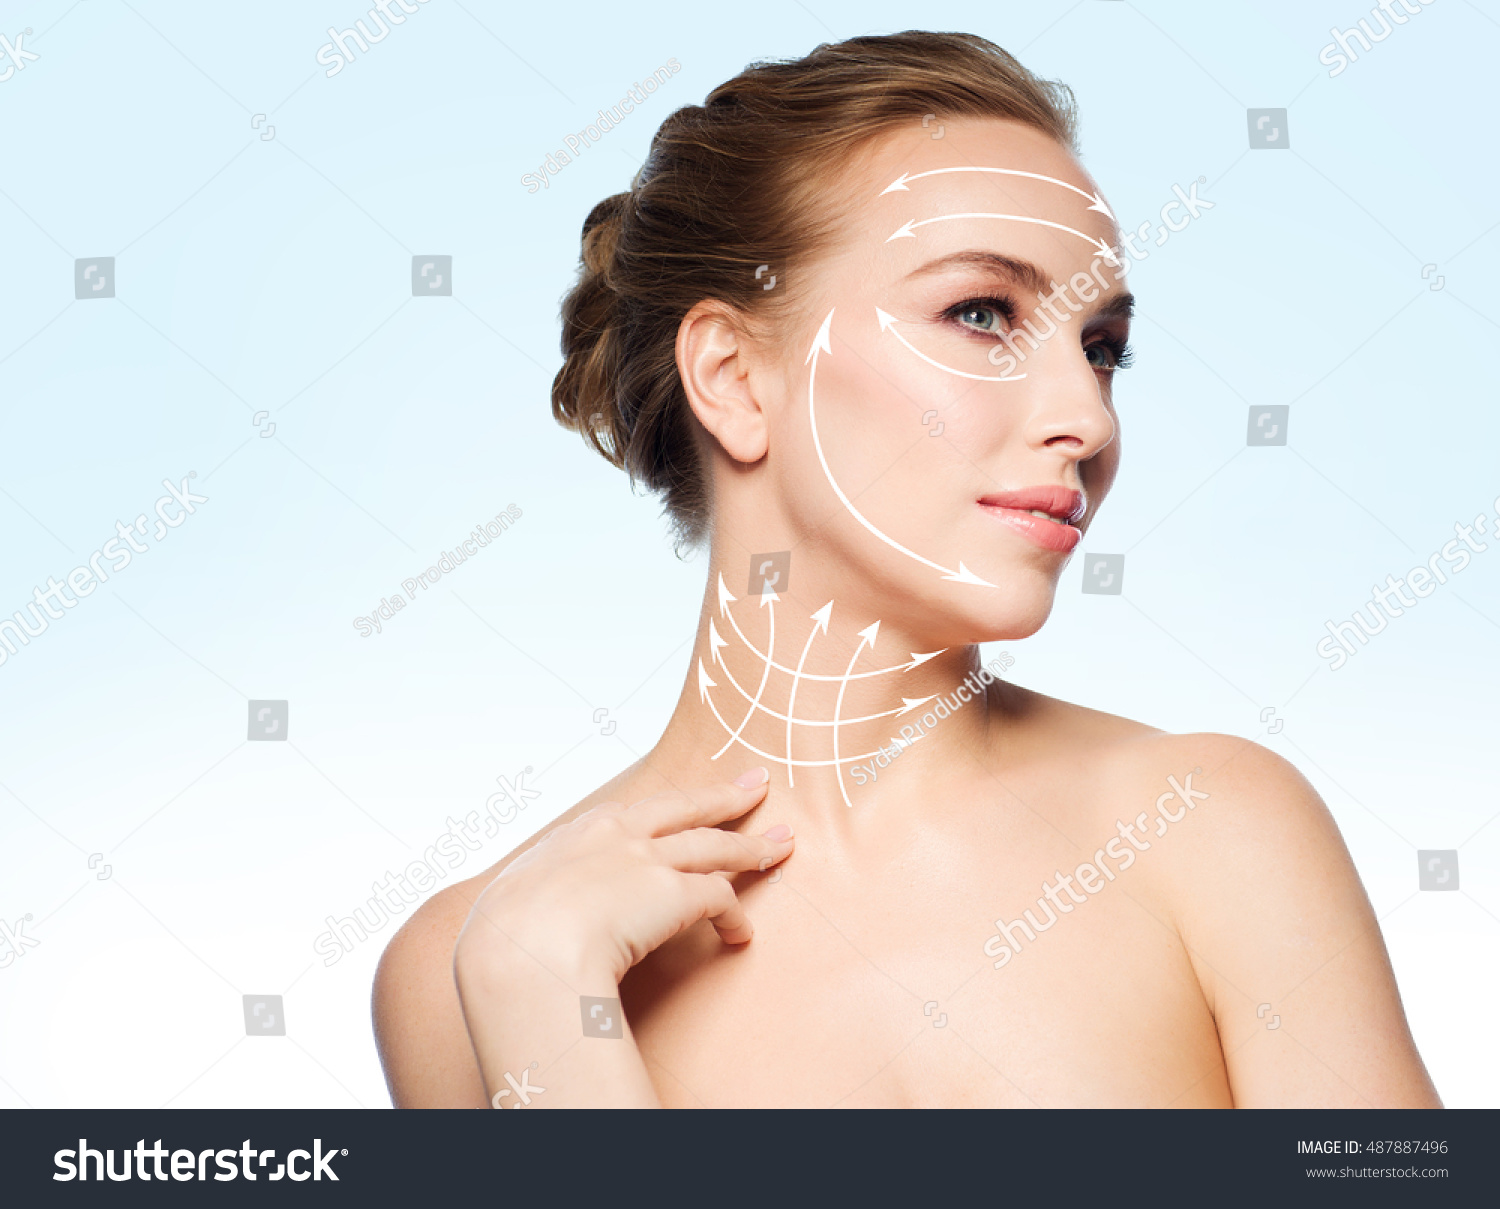 beauty, people, plastic surgery, anti-age and health concept - beautiful young woman touching her neck over blue background #487887496